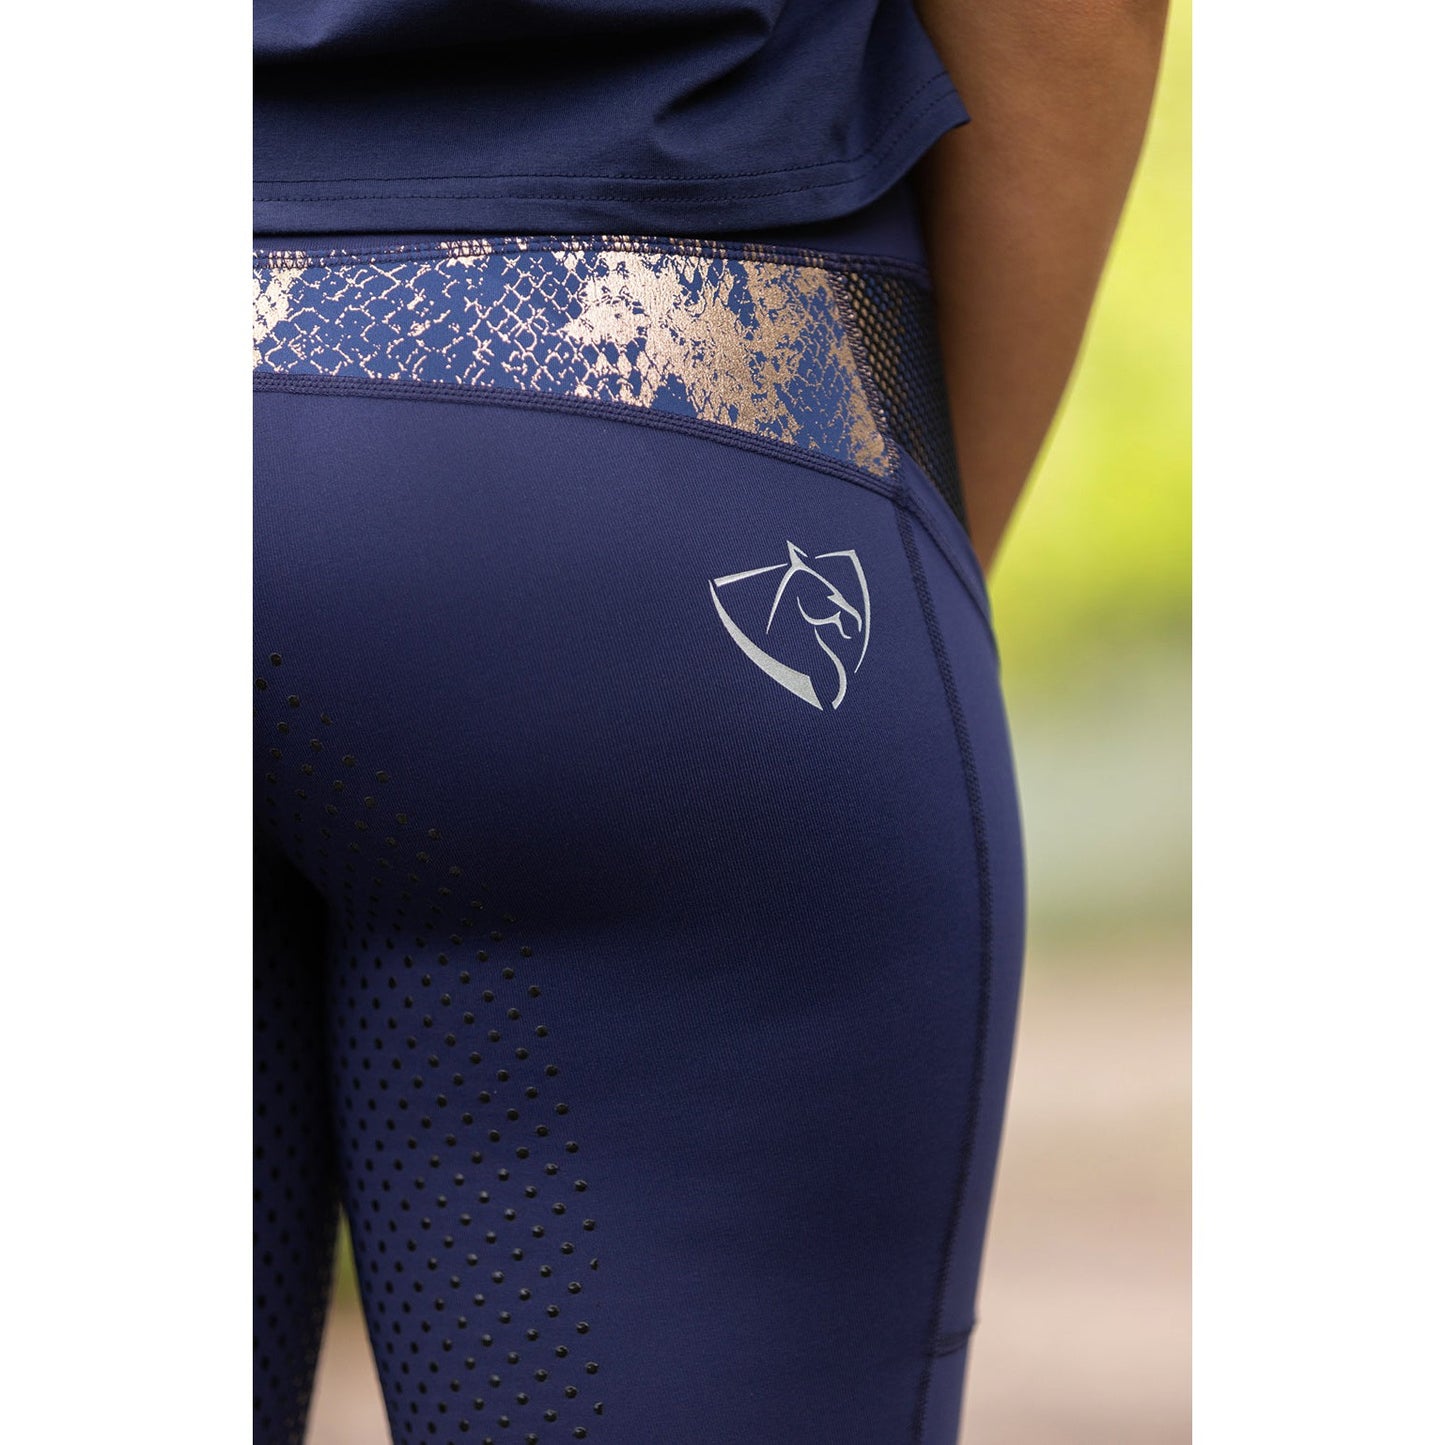 Close-up of navy blue horse riding tights with logo detail.